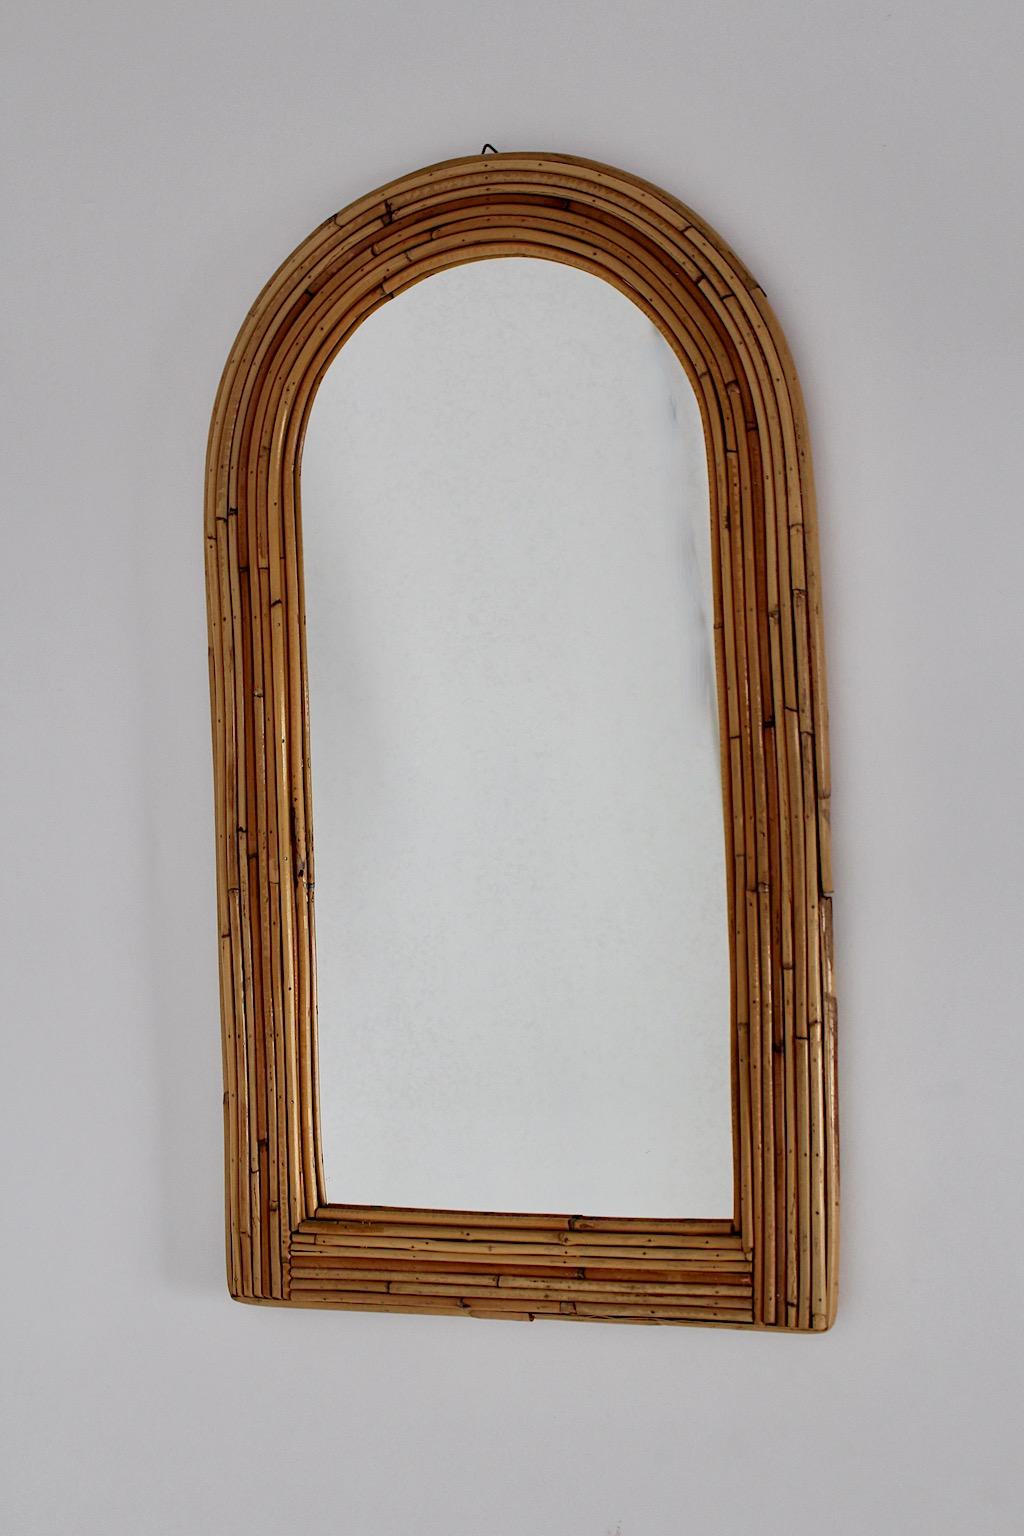 French Bamboo Rattan Mid Century Modern Vintage Wall Mirror 1970s France For Sale